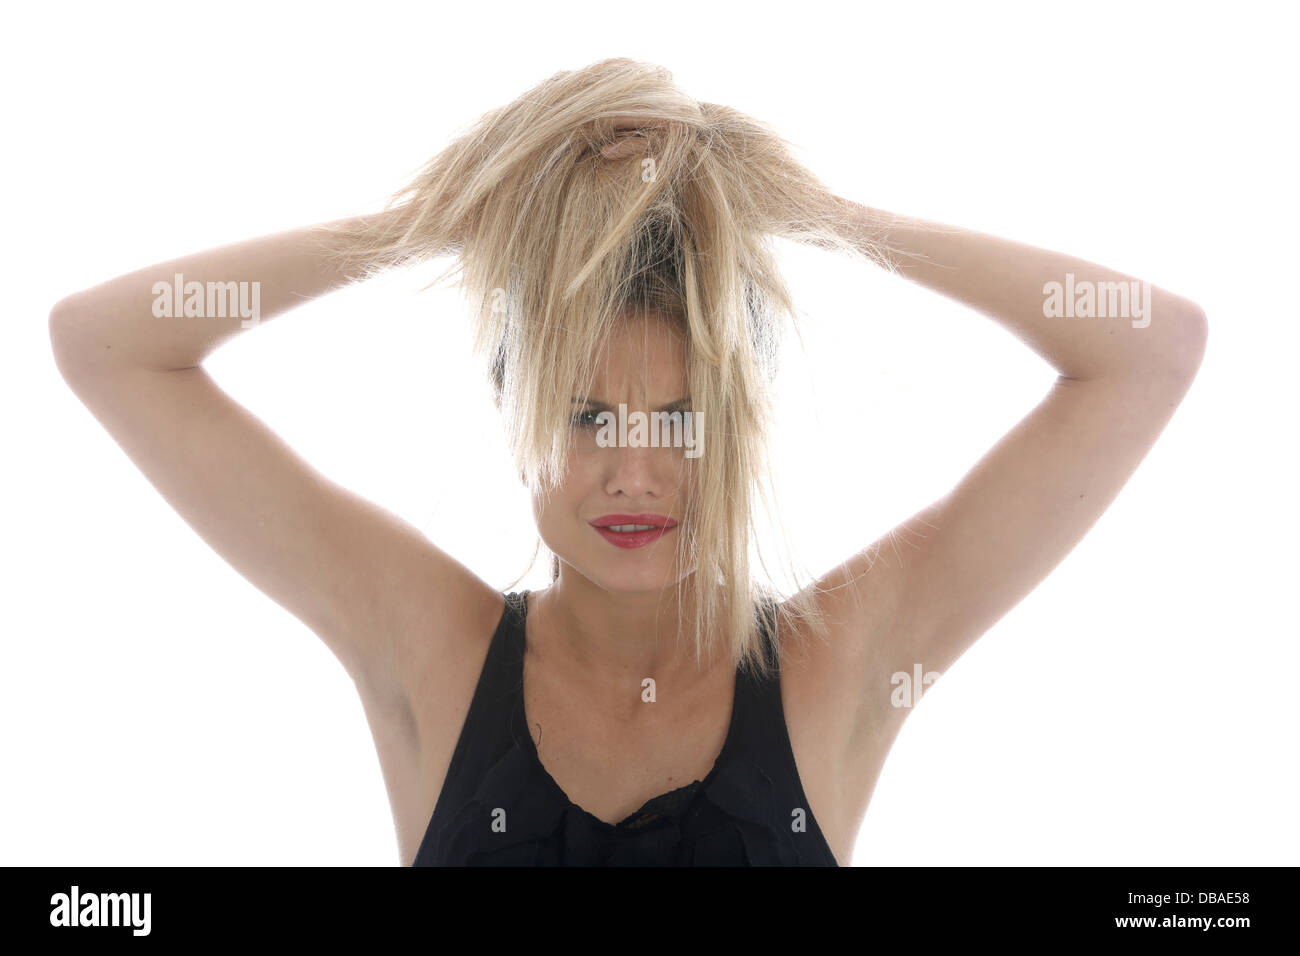 Model Released. Angry Frustrated Young Woman Pulling Hair Stock Photo